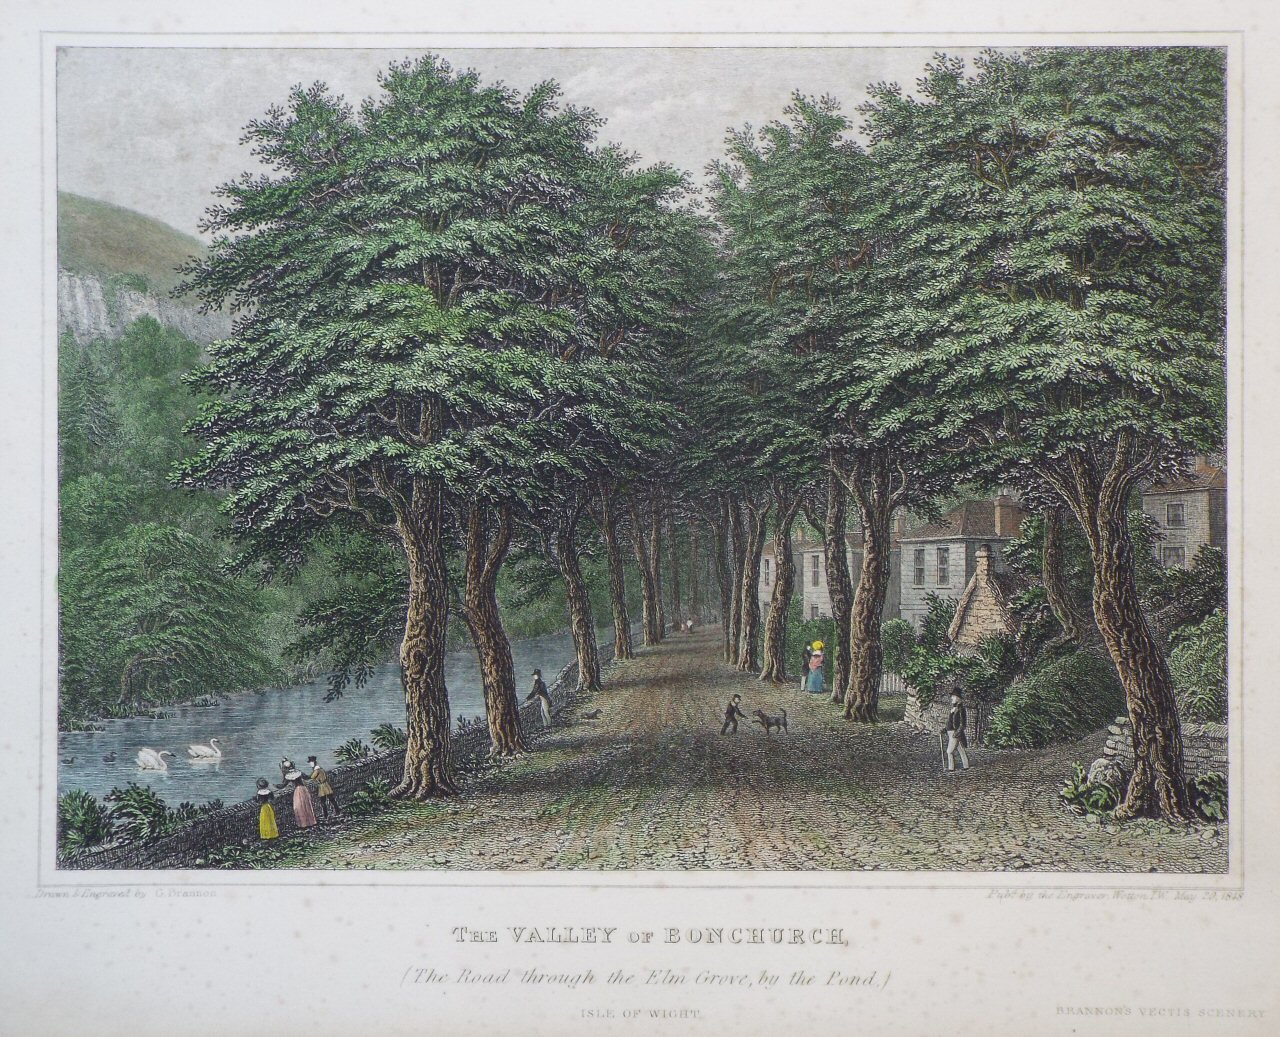 Print - The Valley of Bonchurch, (The Road through the Elm Grove, by the Pond.) - Brannon